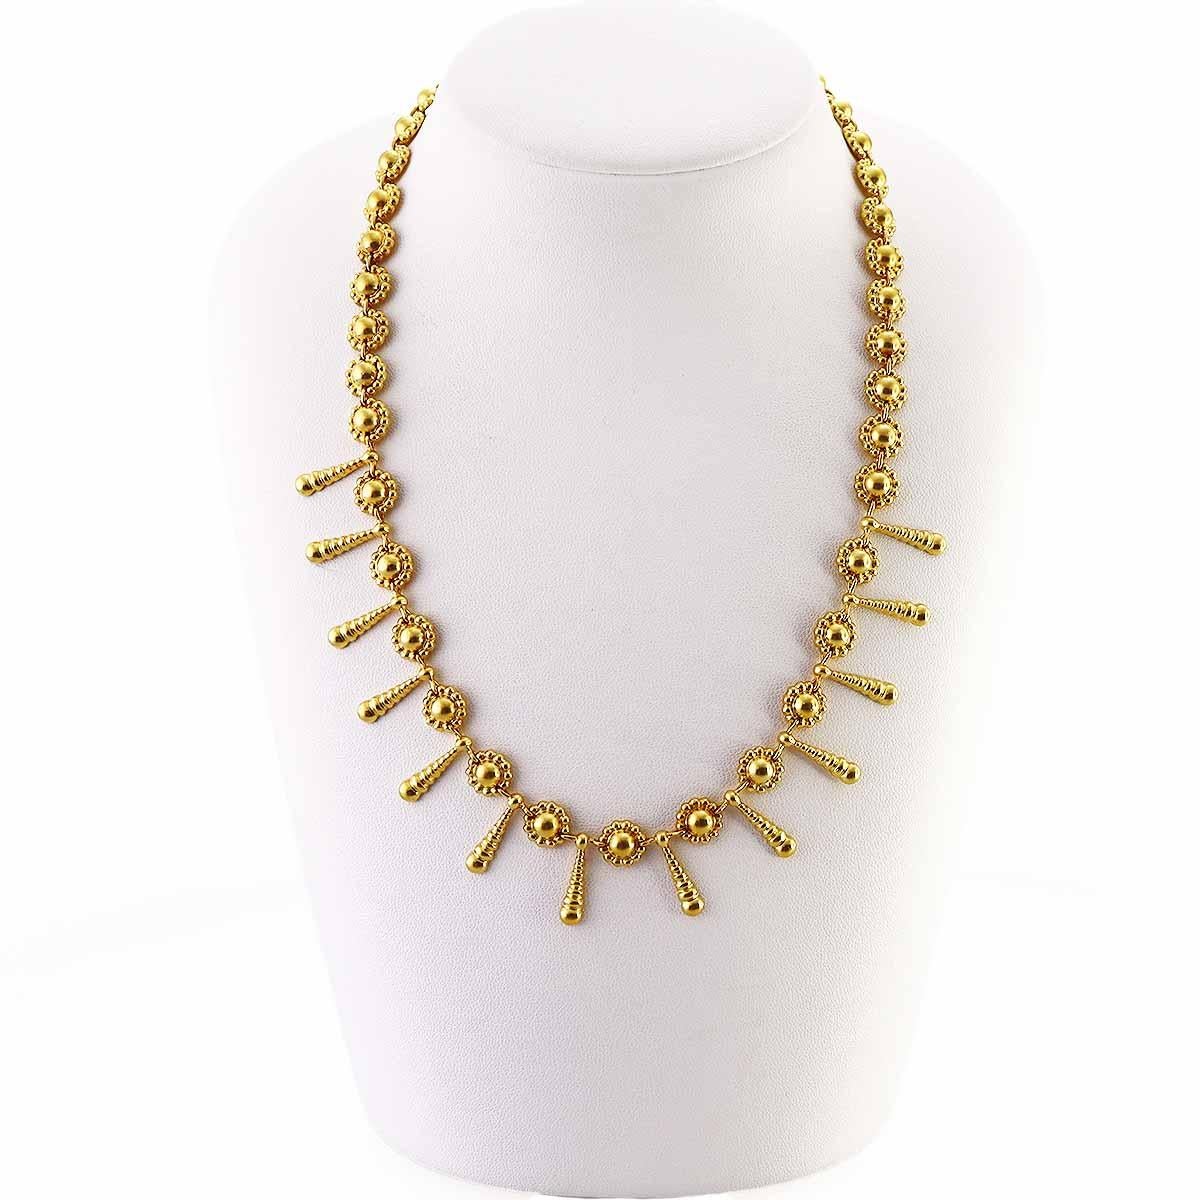 Brand: ilias lalaounis
Name:Gold Necklace
Material:750 K18 YG yellow gold
Weight:40.9g(Approx)
neck around:44cm / 17.32in(Approx)
Width(inch):8.62mm-17mm / 0.33in-0.66in(Approx)
Comes with:Our shop original box
Comment:Made in Greece